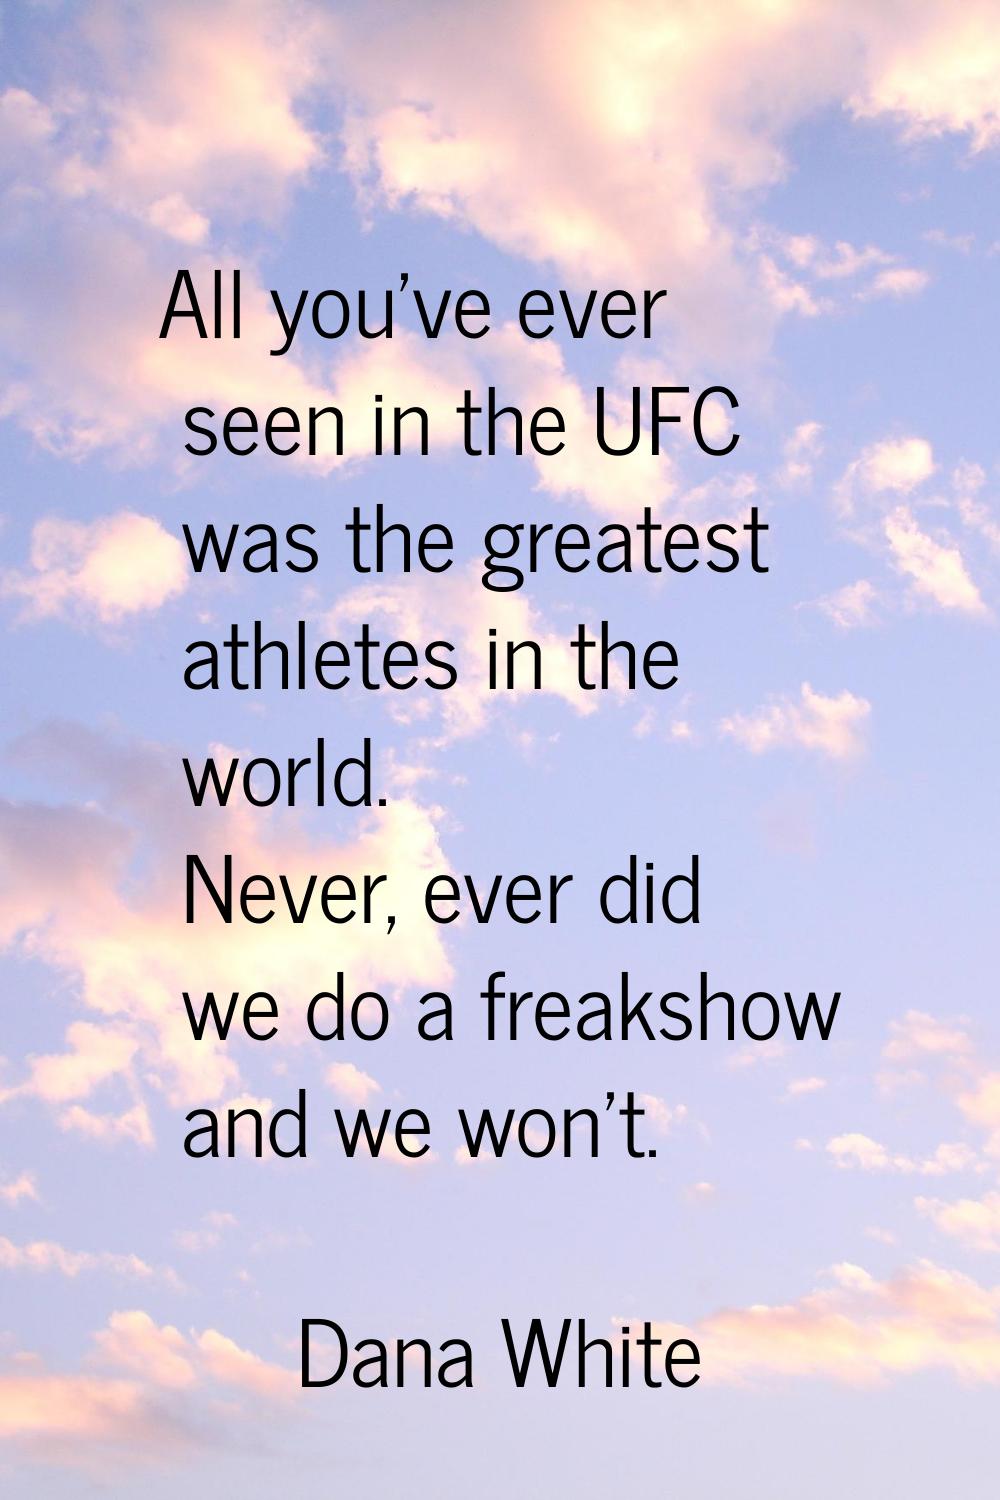 All you've ever seen in the UFC was the greatest athletes in the world. Never, ever did we do a fre